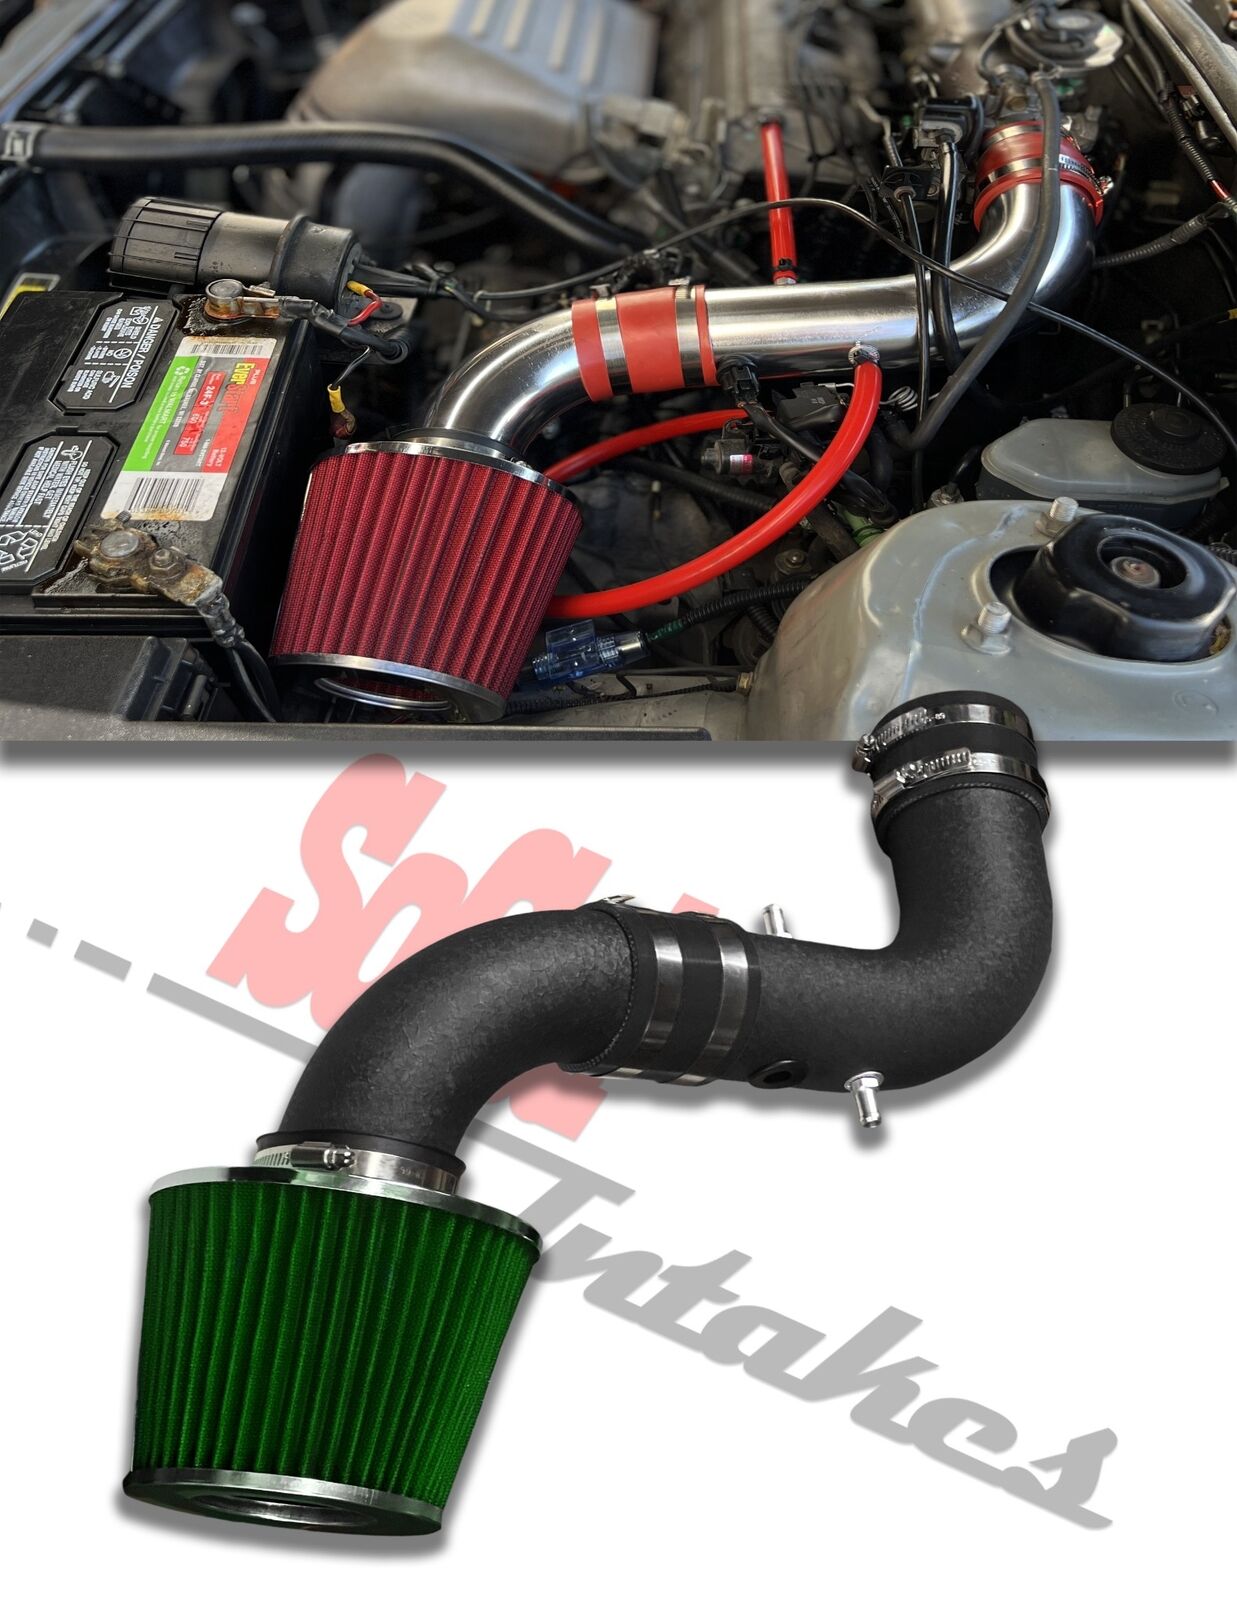 COATED BLACK GREEN Air Intake Kit and Filter For 1998-01 Toyota Camry Solara 2.2